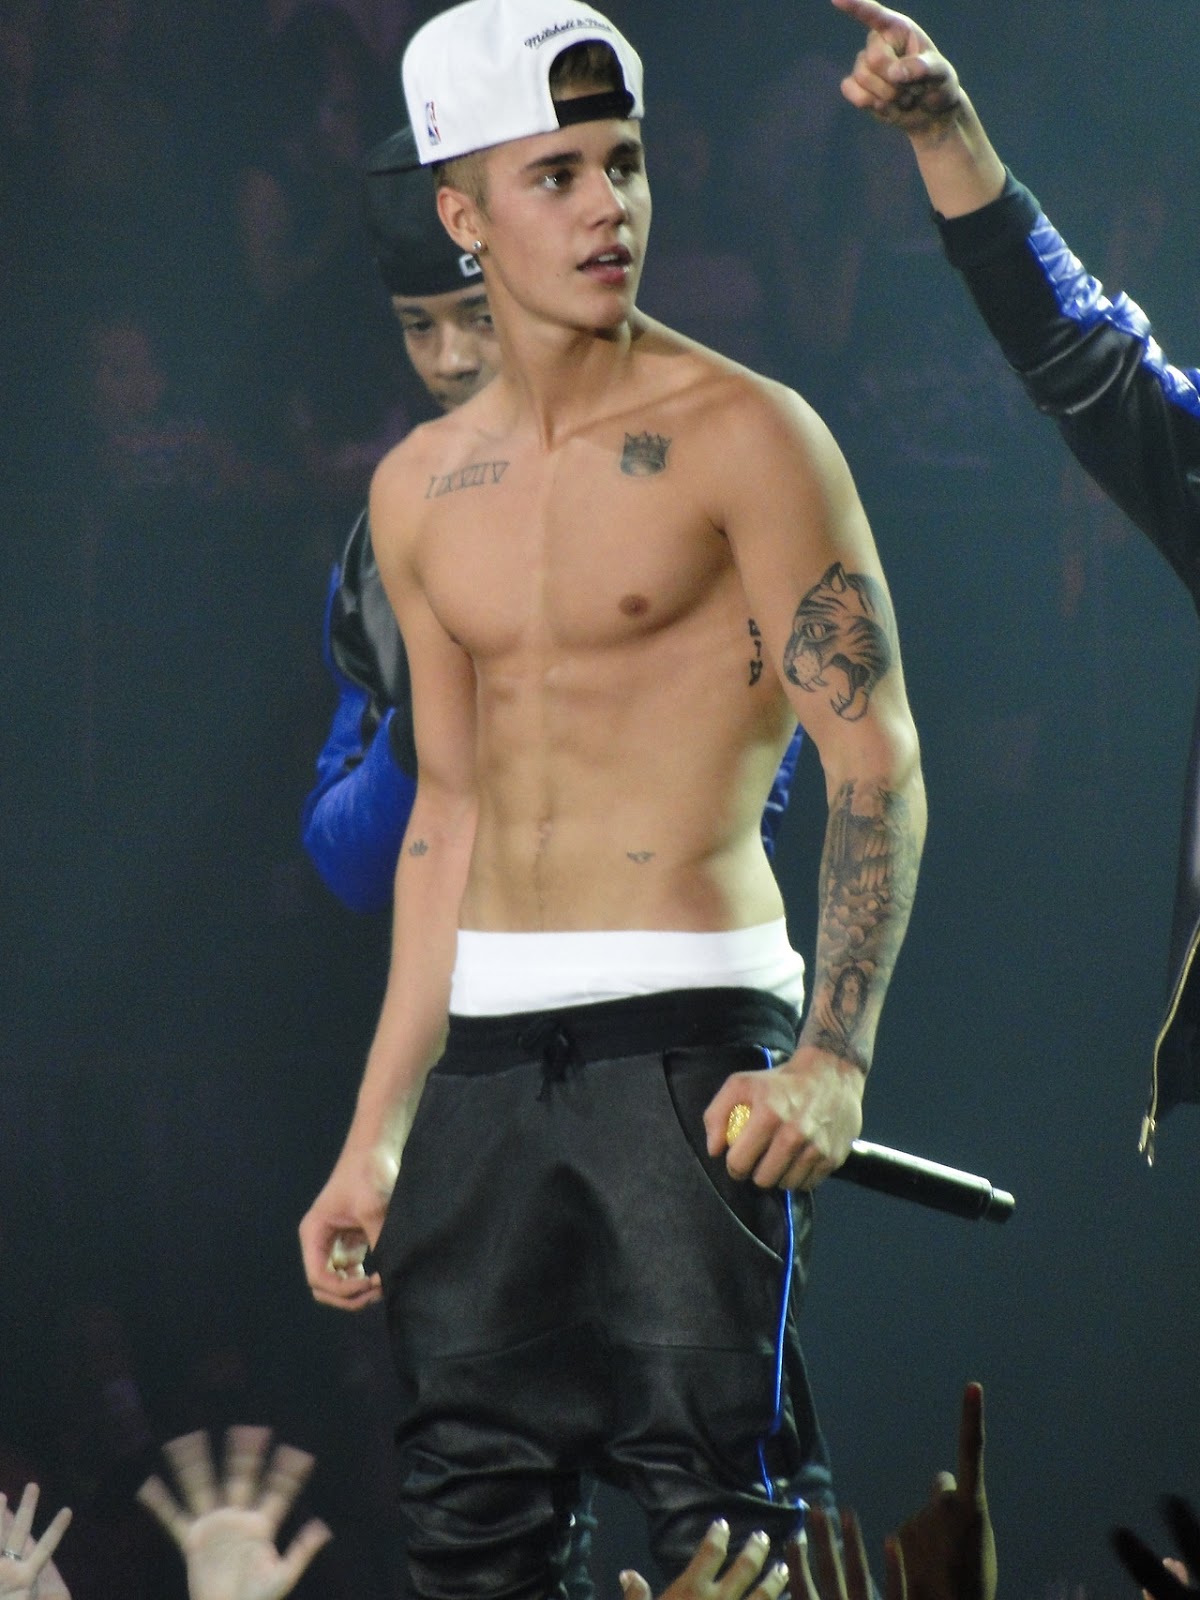 The Stars Come Out To Play: Justin Bieber - New Shirtless Pics Justin Biebe...